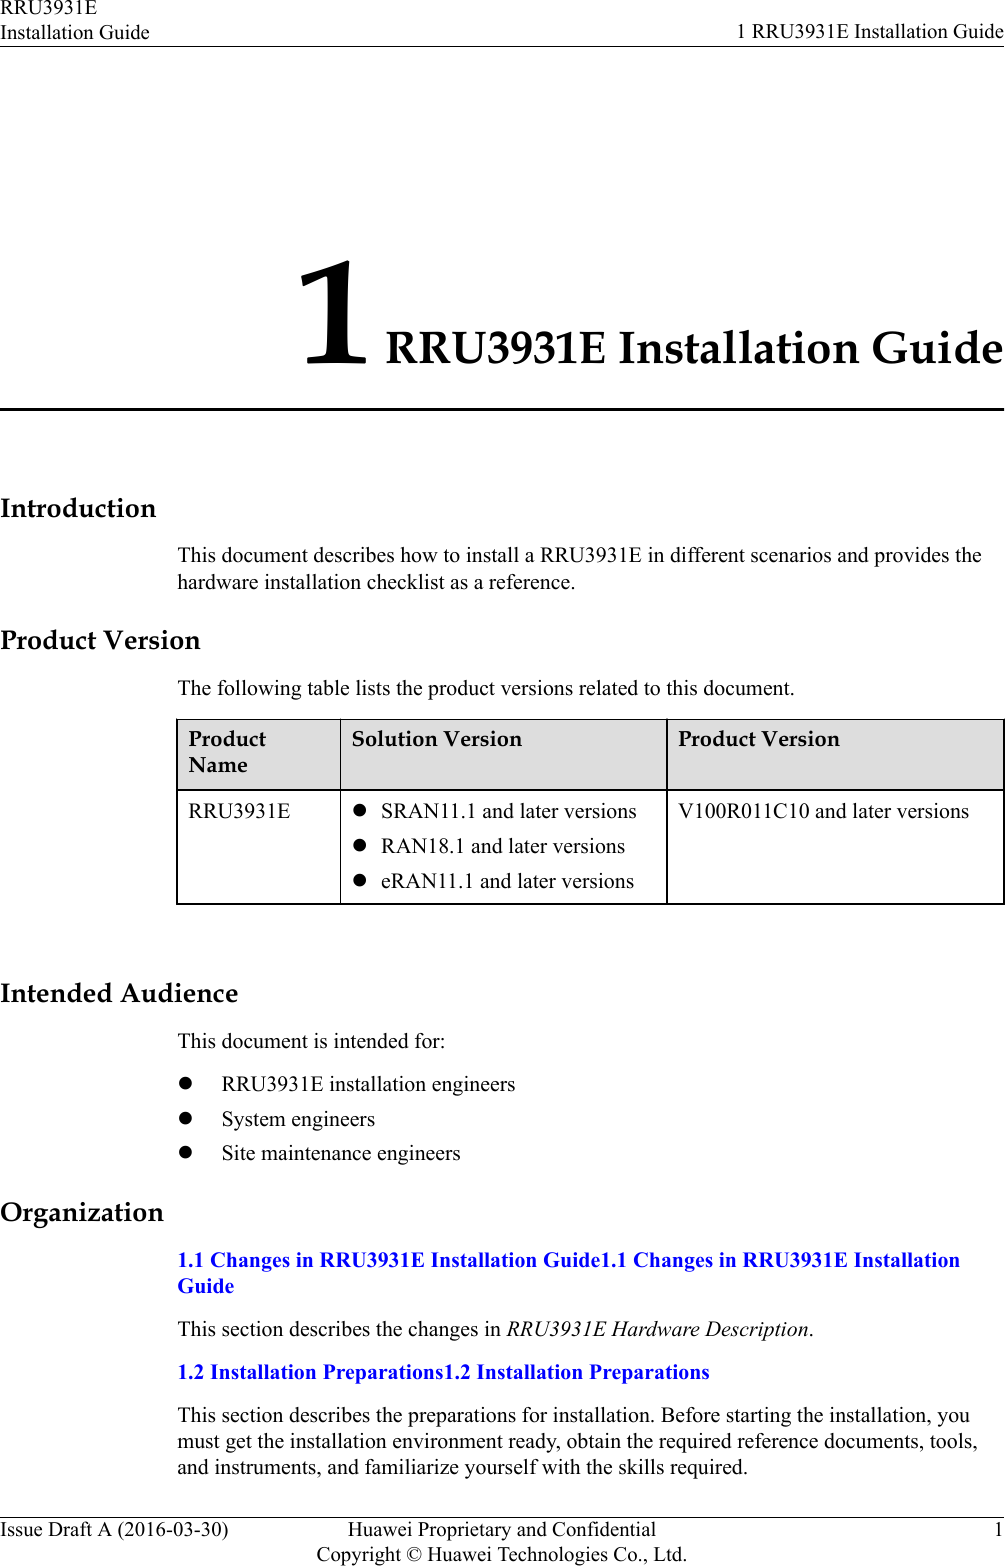 1 RRU3931E Installation GuideIntroductionThis document describes how to install a RRU3931E in different scenarios and provides thehardware installation checklist as a reference.Product VersionThe following table lists the product versions related to this document.ProductNameSolution Version Product VersionRRU3931E lSRAN11.1 and later versionslRAN18.1 and later versionsleRAN11.1 and later versionsV100R011C10 and later versions Intended AudienceThis document is intended for:lRRU3931E installation engineerslSystem engineerslSite maintenance engineersOrganization1.1 Changes in RRU3931E Installation Guide1.1 Changes in RRU3931E InstallationGuideThis section describes the changes in RRU3931E Hardware Description.1.2 Installation Preparations1.2 Installation PreparationsThis section describes the preparations for installation. Before starting the installation, youmust get the installation environment ready, obtain the required reference documents, tools,and instruments, and familiarize yourself with the skills required.RRU3931EInstallation Guide 1 RRU3931E Installation GuideIssue Draft A (2016-03-30) Huawei Proprietary and ConfidentialCopyright © Huawei Technologies Co., Ltd.1